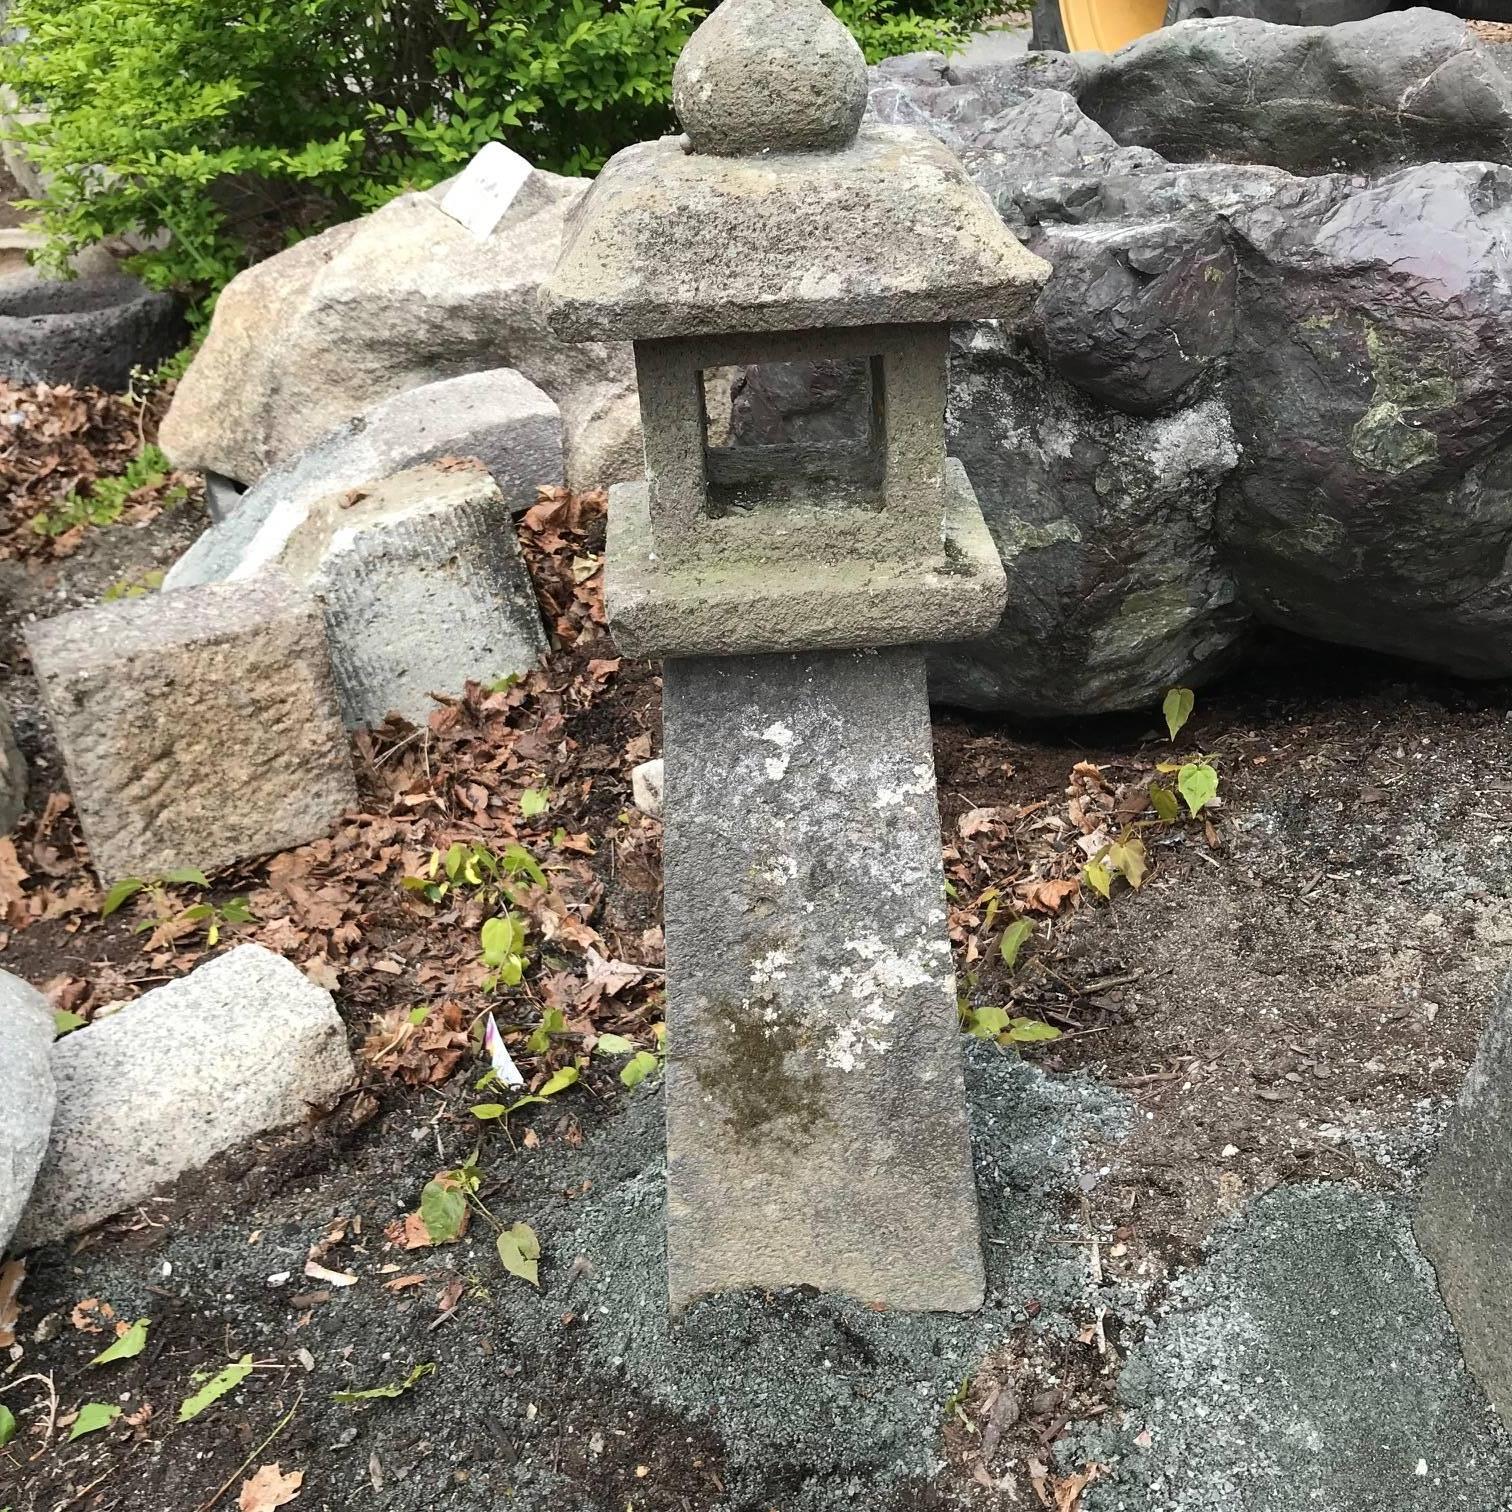 Japan, a fine pathway stone lantern with original and beautiful lichen and patina from great age, 28 inches high.

They work especially well at night with an oil candle. See our photo.
Upon request, we will include one complimentary bottle to get